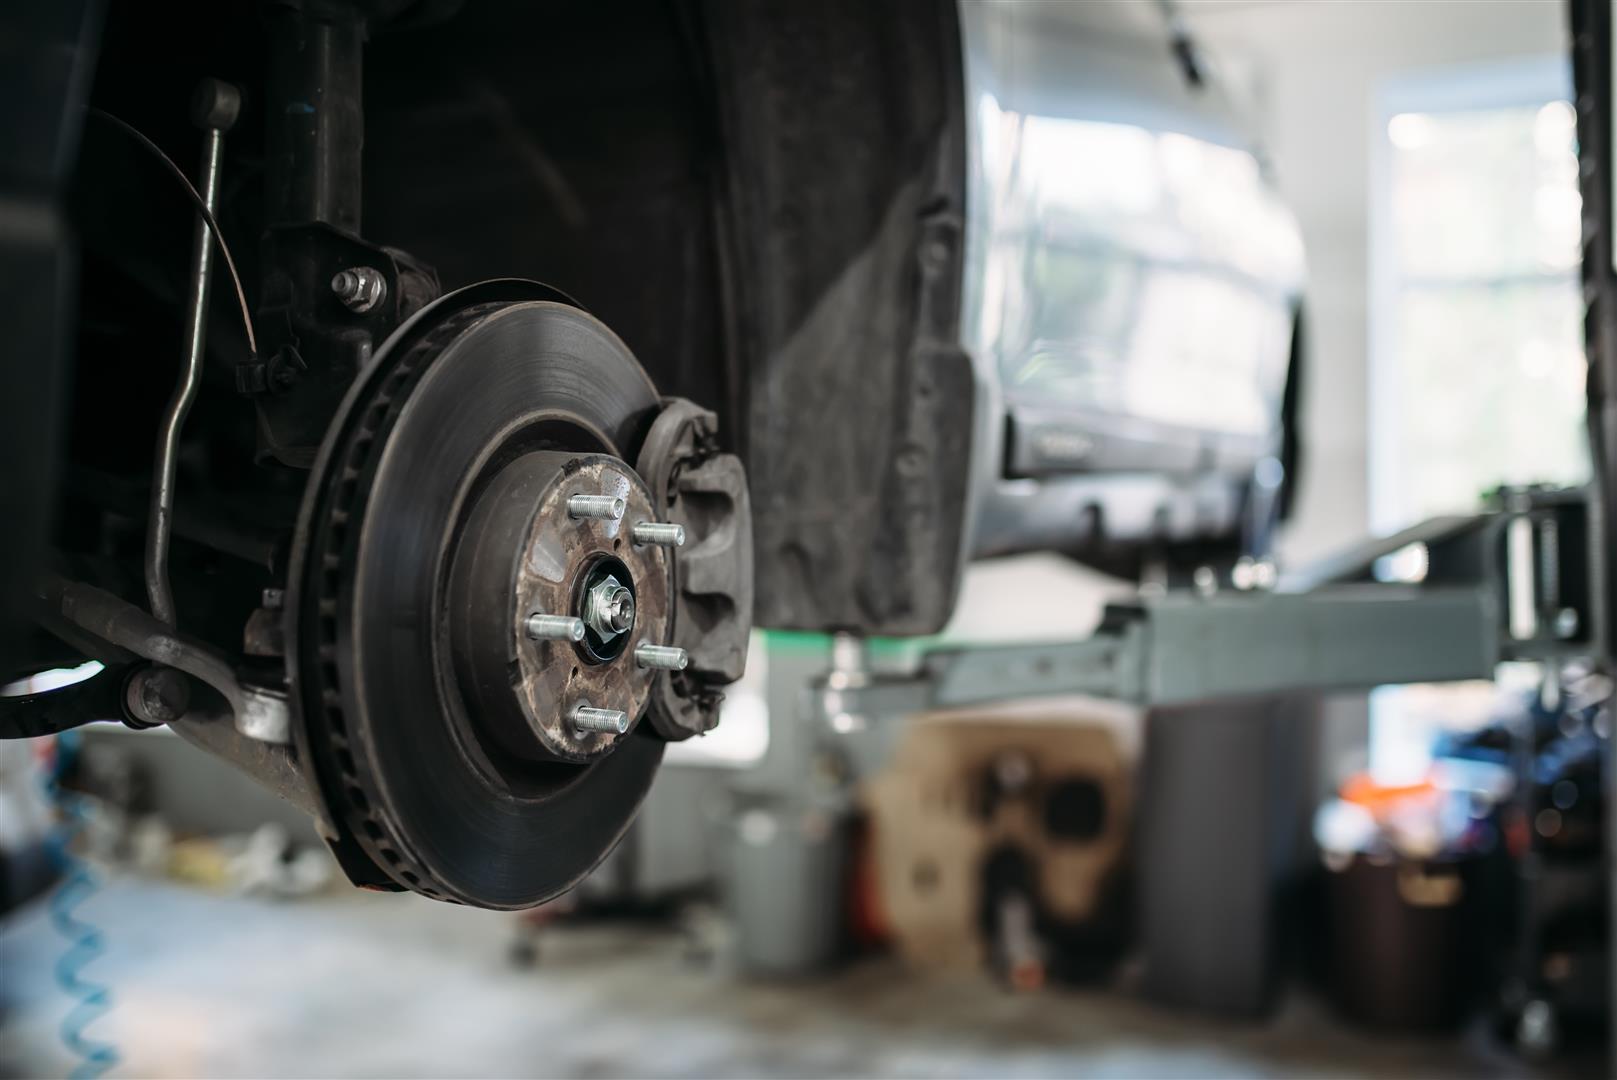 Brake Problems? Fox Run Auto is Here to Help!